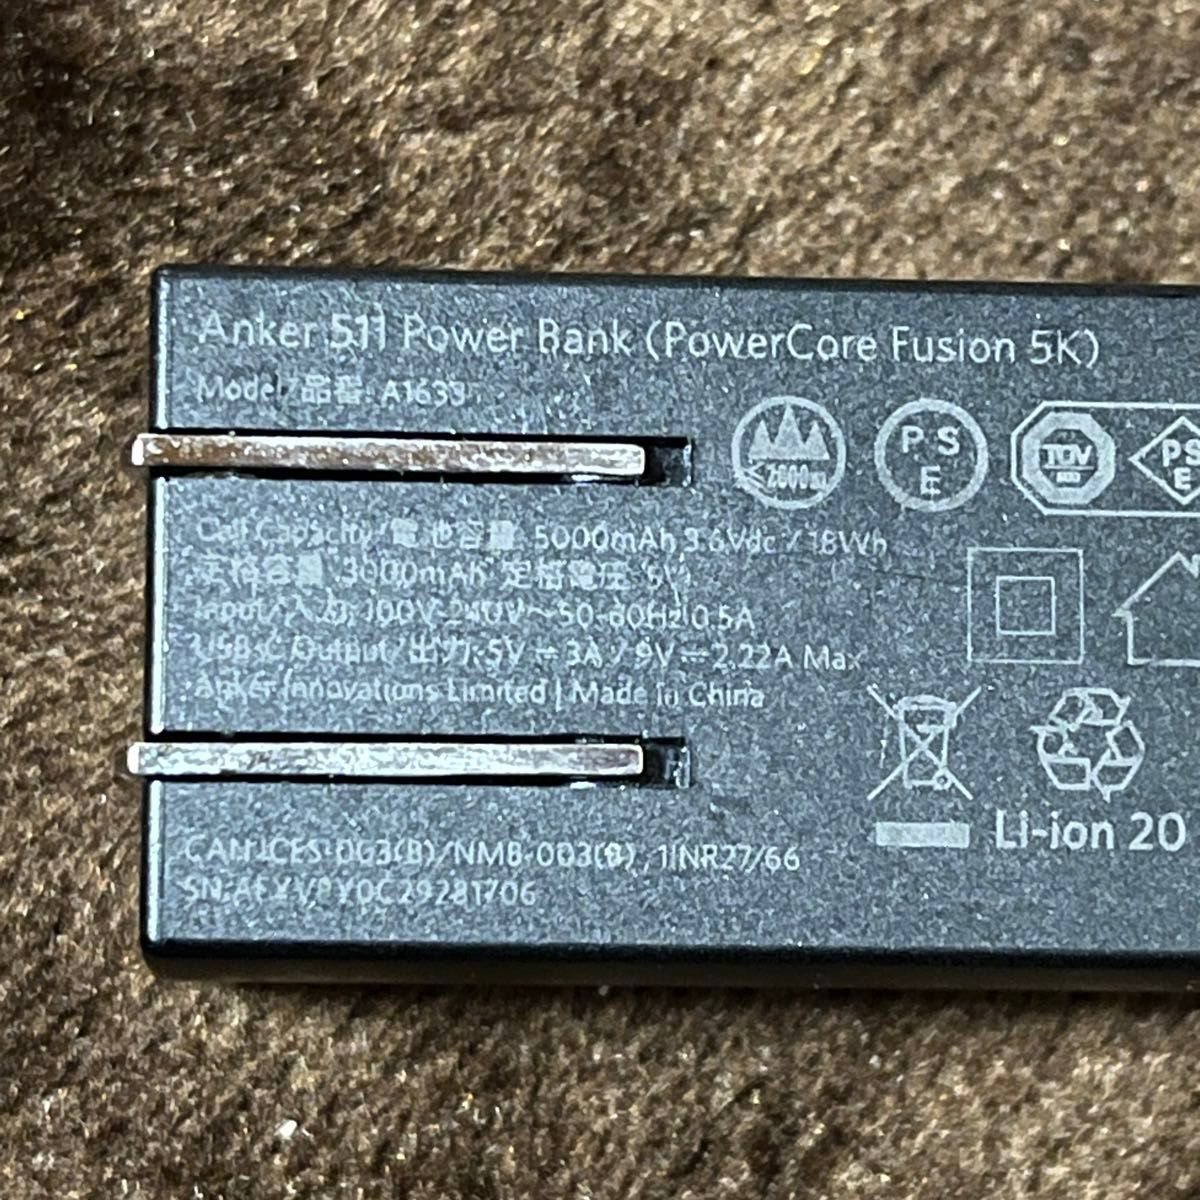 Anker 511 Power Bank PowerCore Fusion 5000 モバイルバッテリー